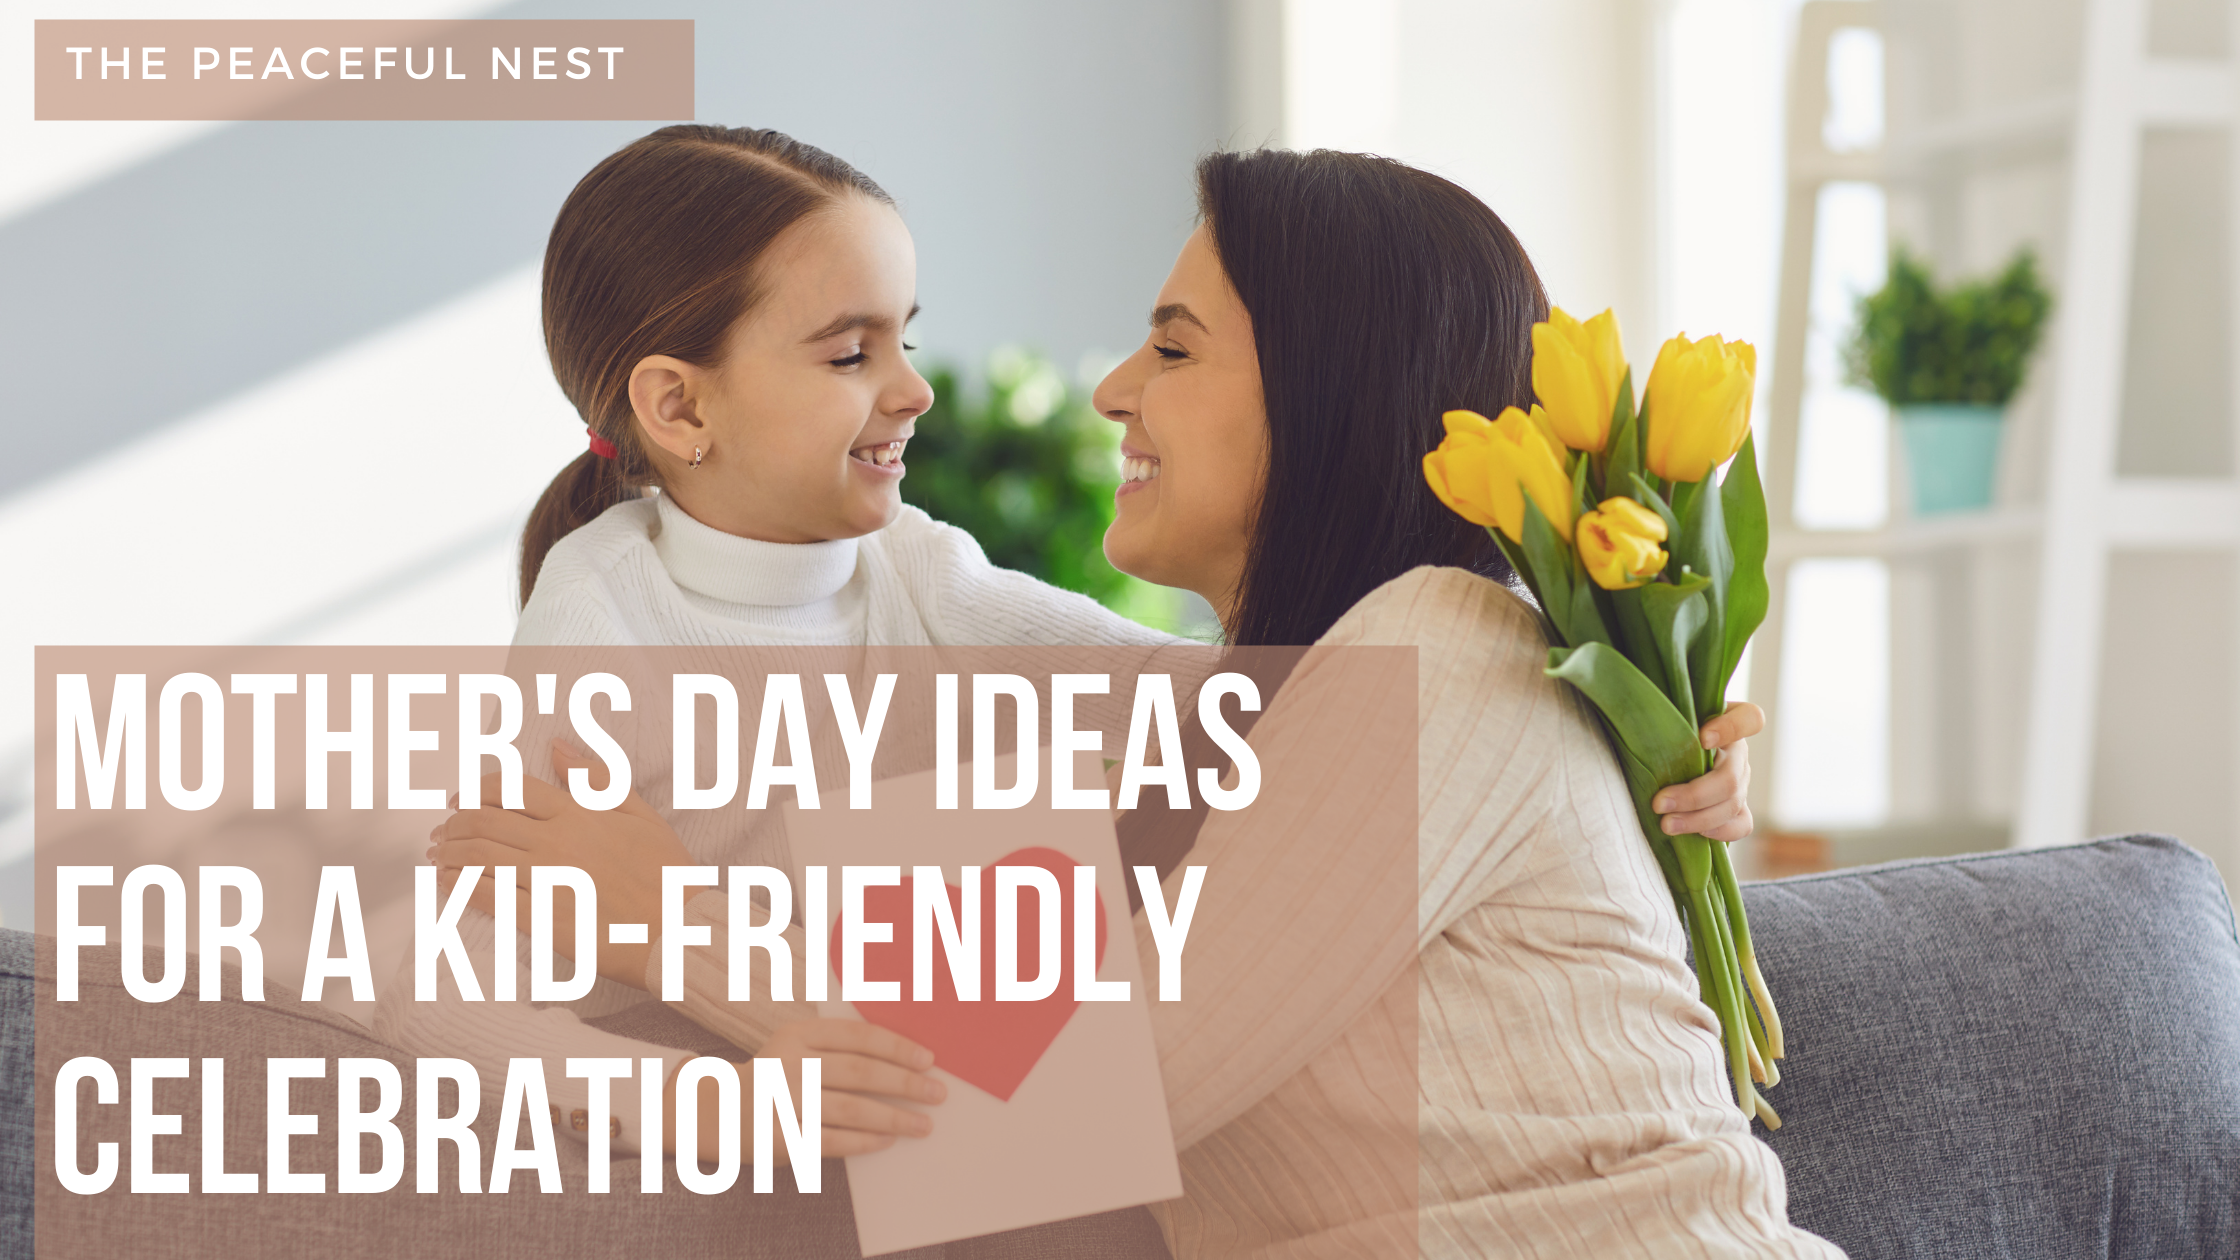 Mother’s Day Ideas for a Kid-Friendly Celebration